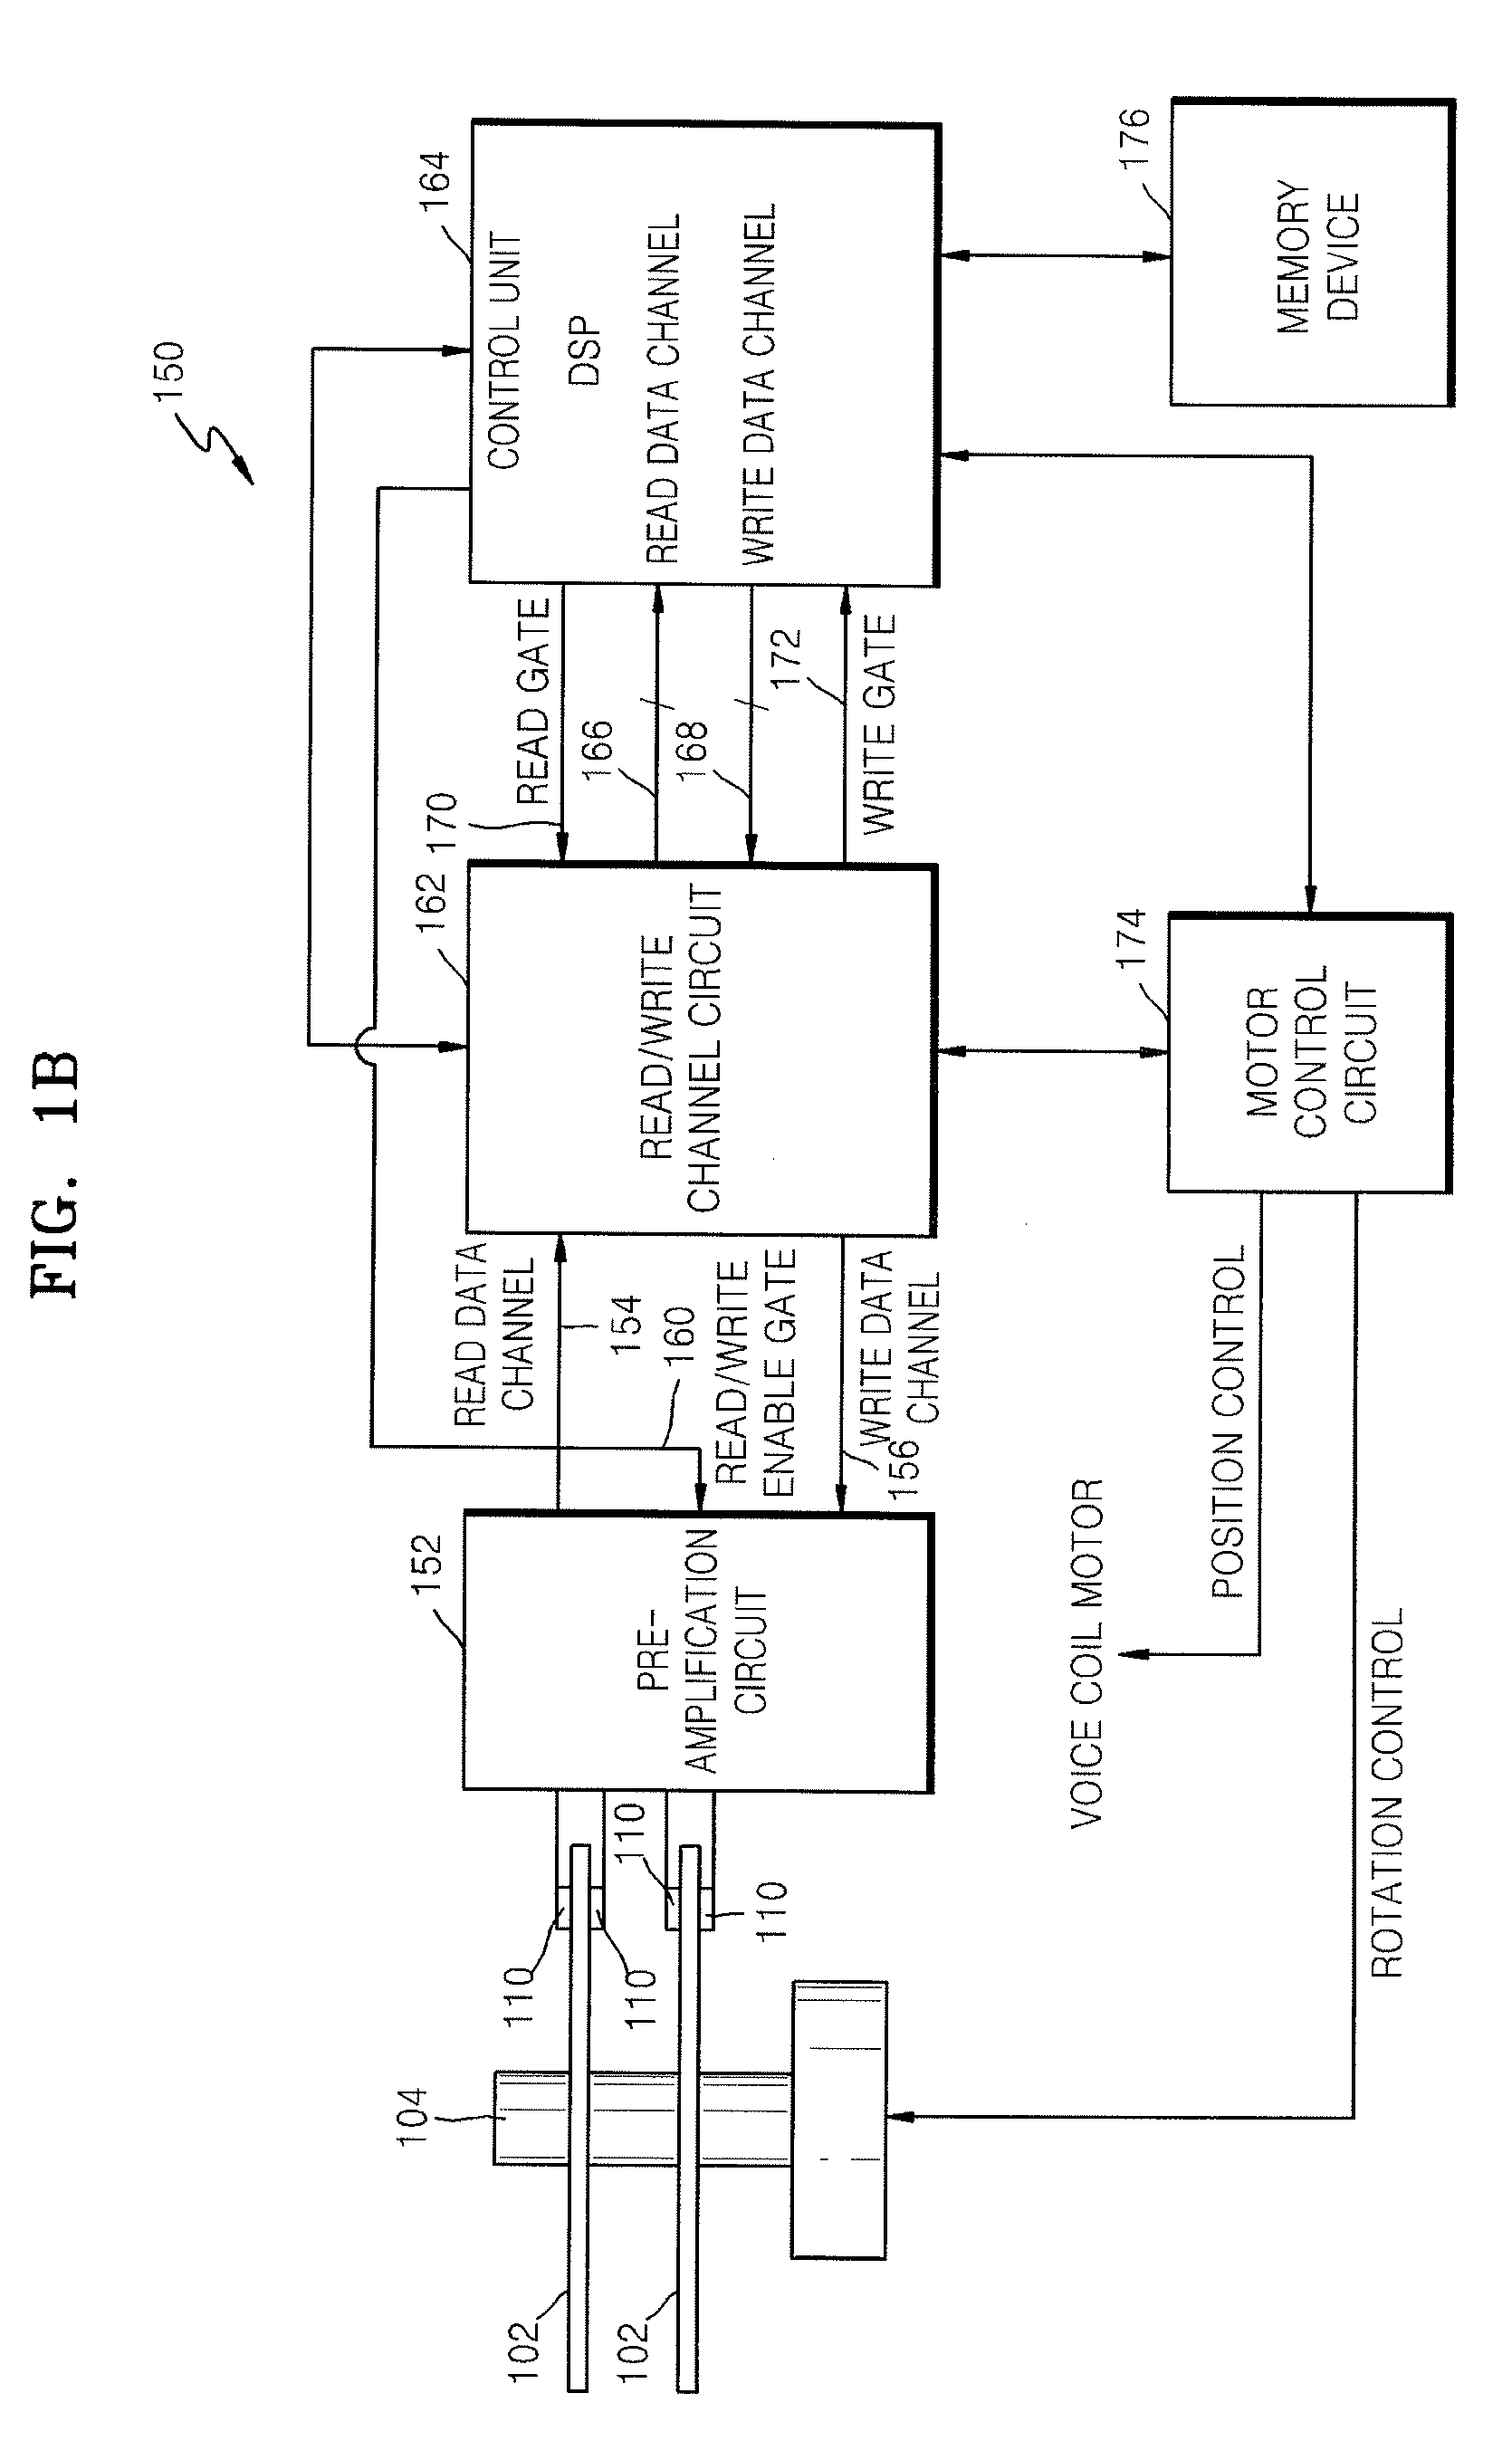 Hard disk drive having improved head stability at low temperature and method of applying current to a head of the hard disk drive